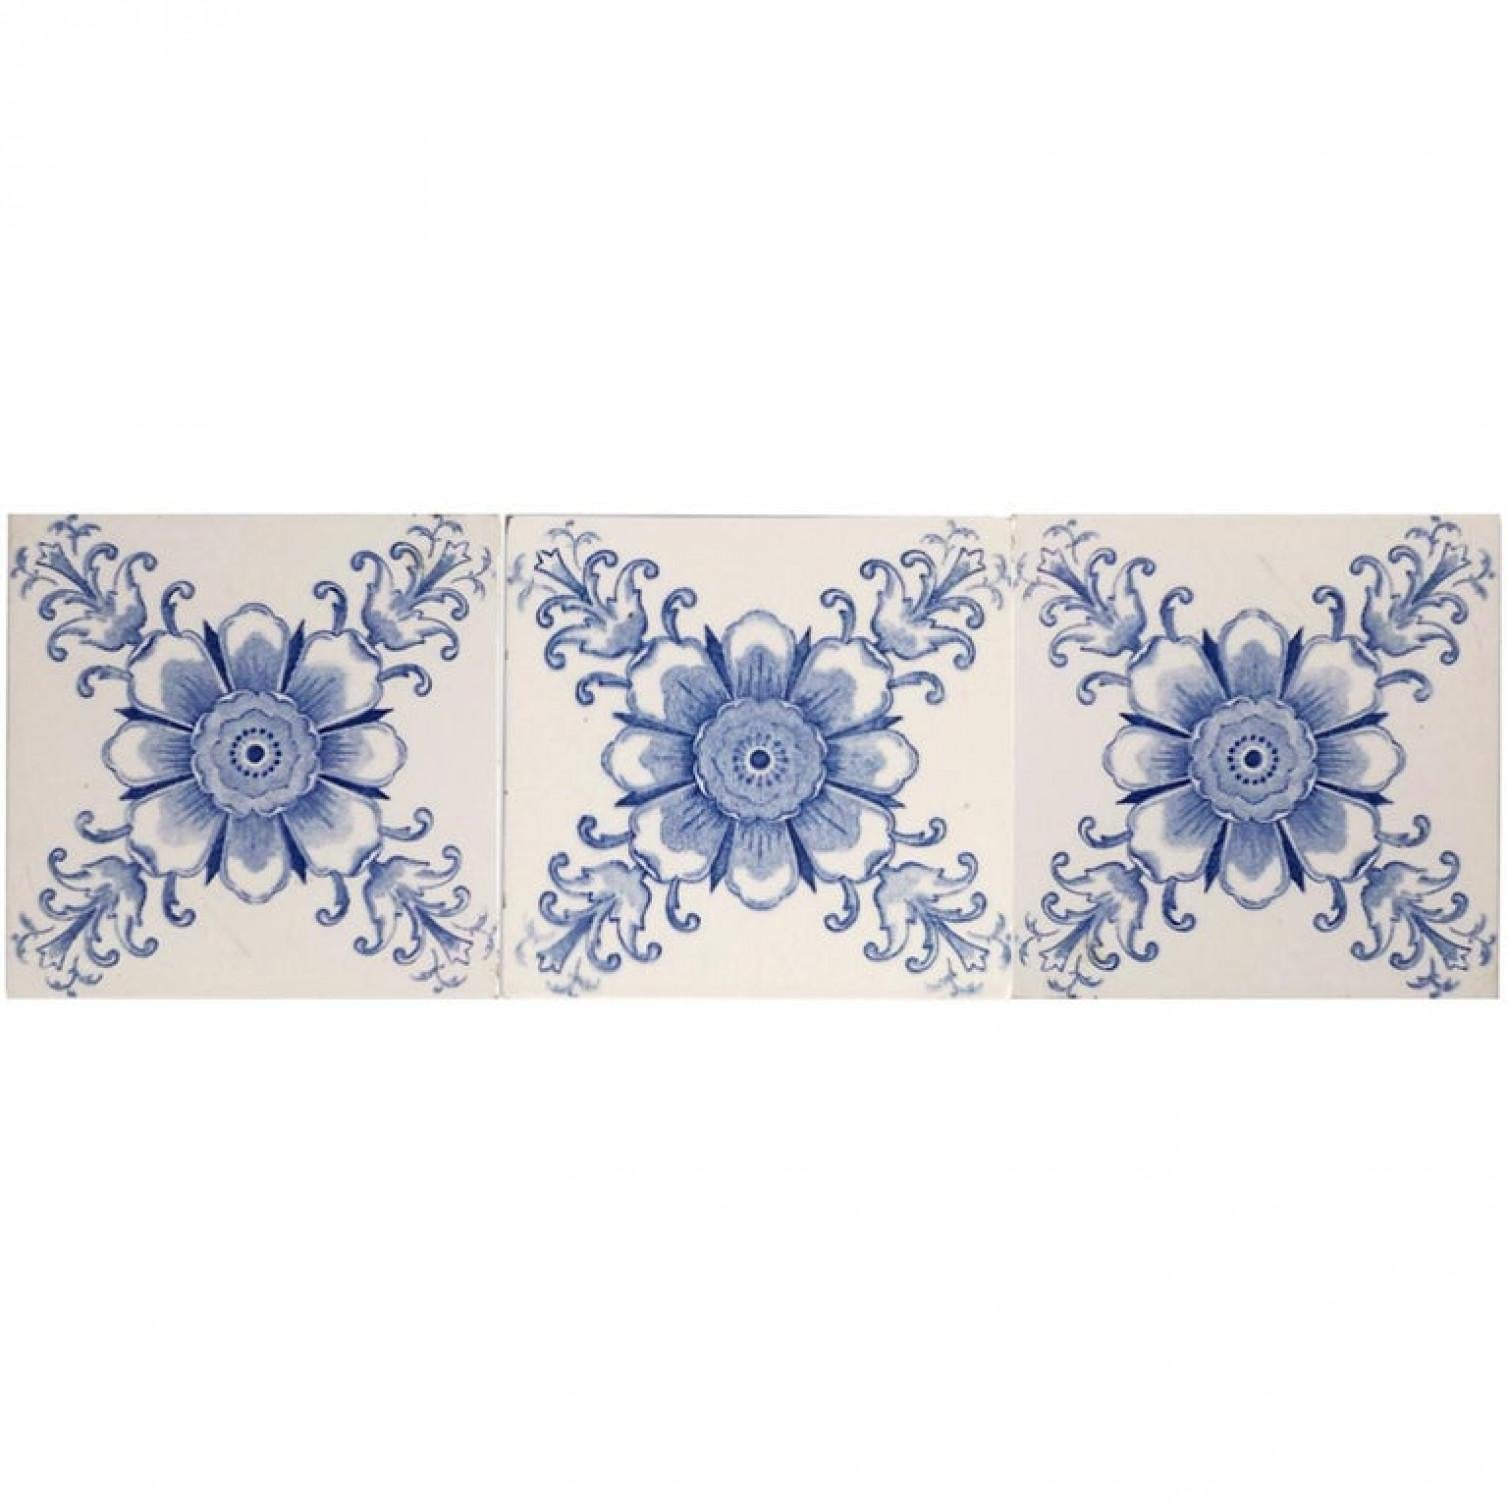 Belgian White and Blue Flower Art Deco Glazed Tiles by Le Glaive, 1920 For Sale